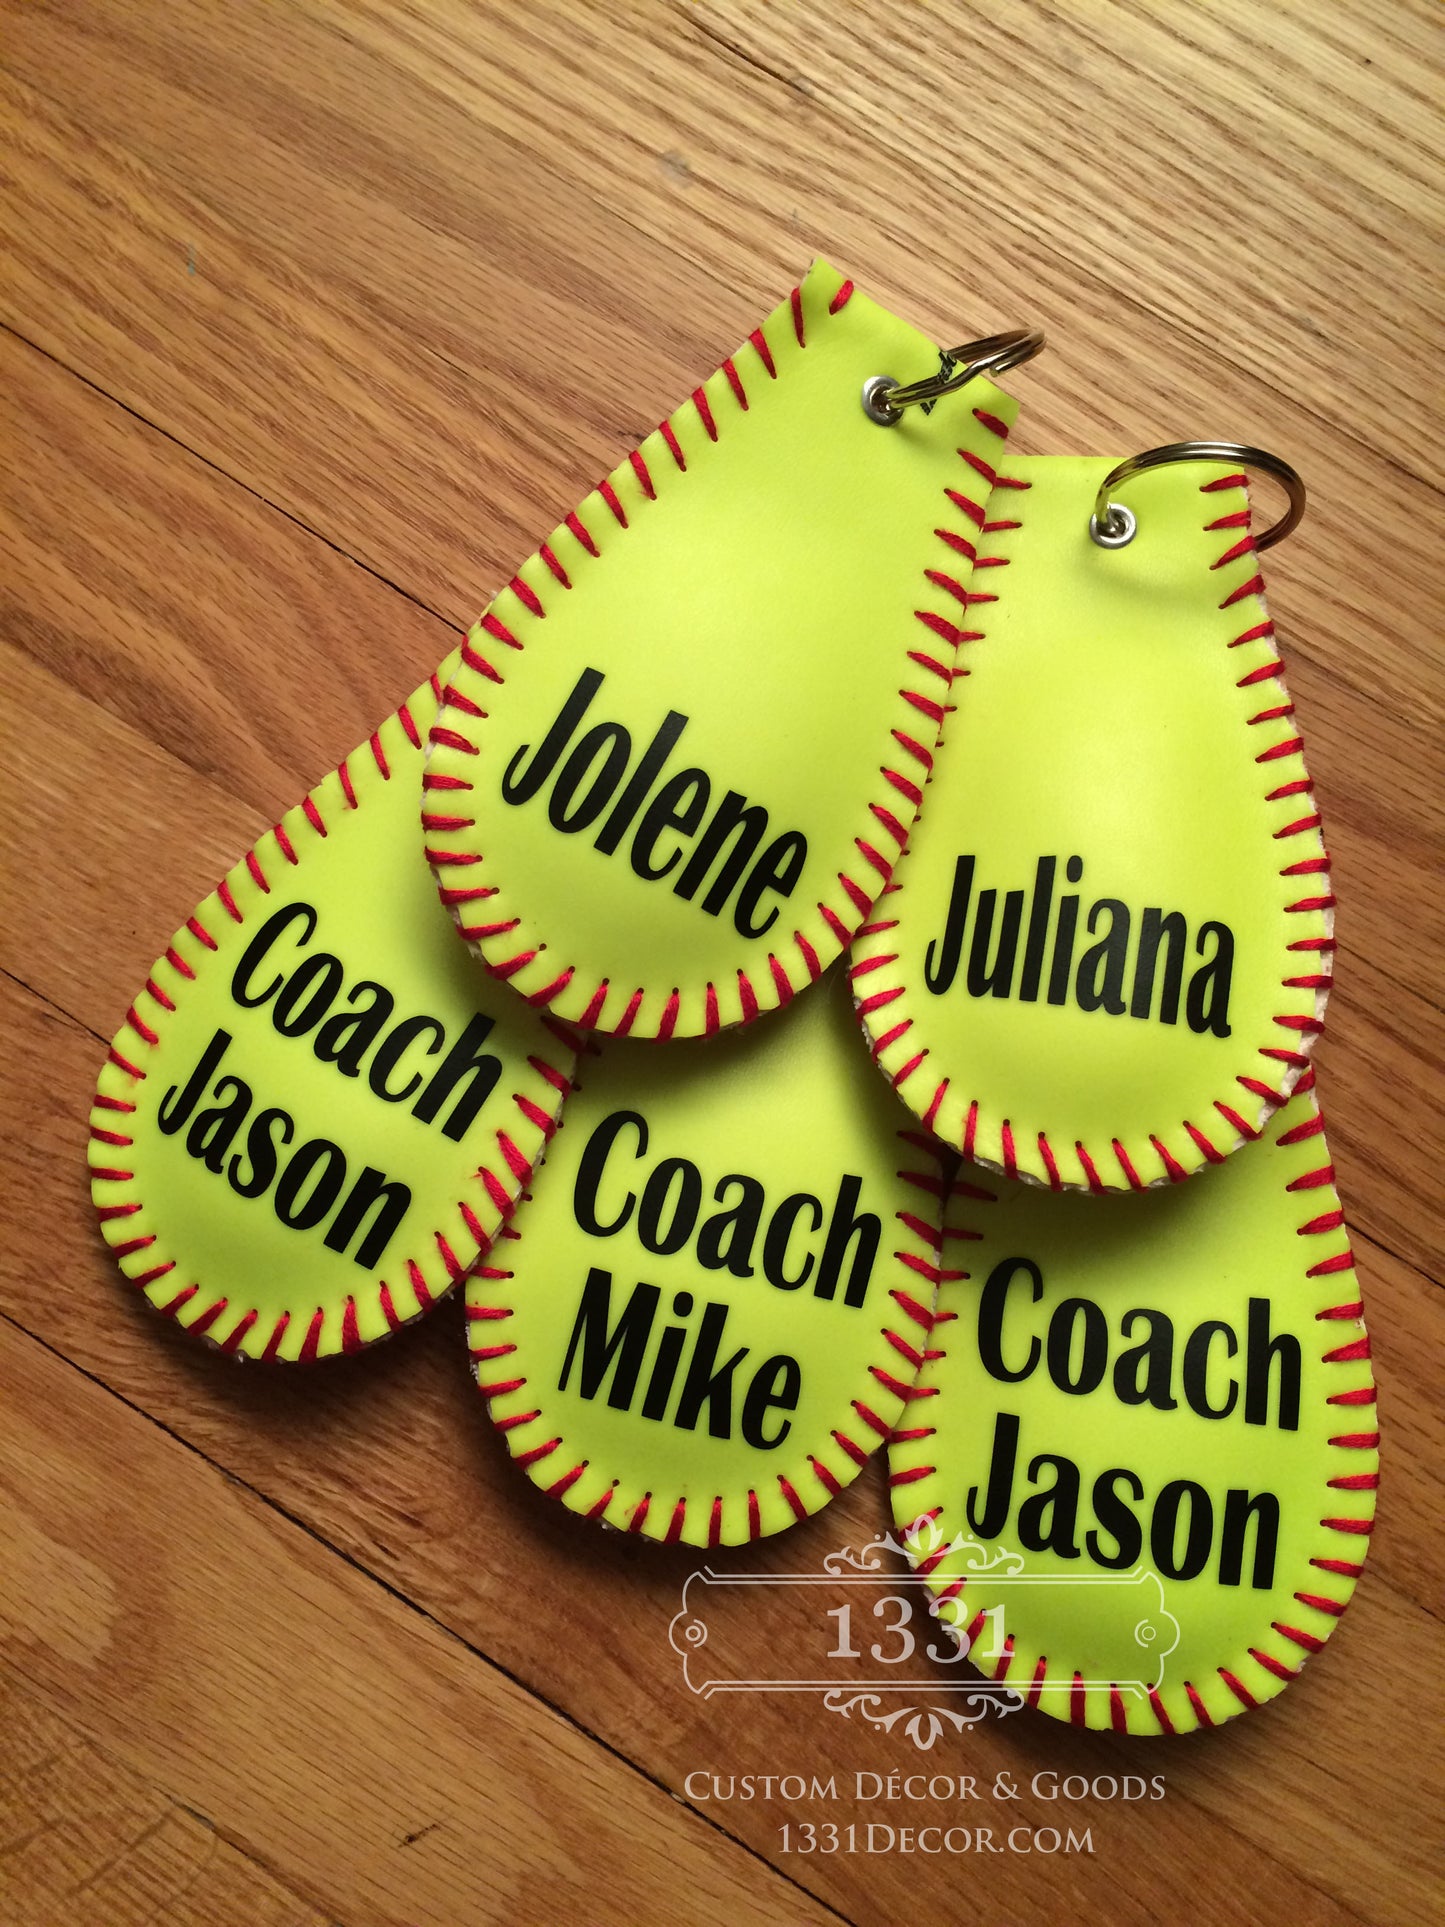 Softball Key Chain, Softball Keychain, Keychain, Key chain, Softball gift, Custom Softball, Coach gift, Softball team gift, Father's Day